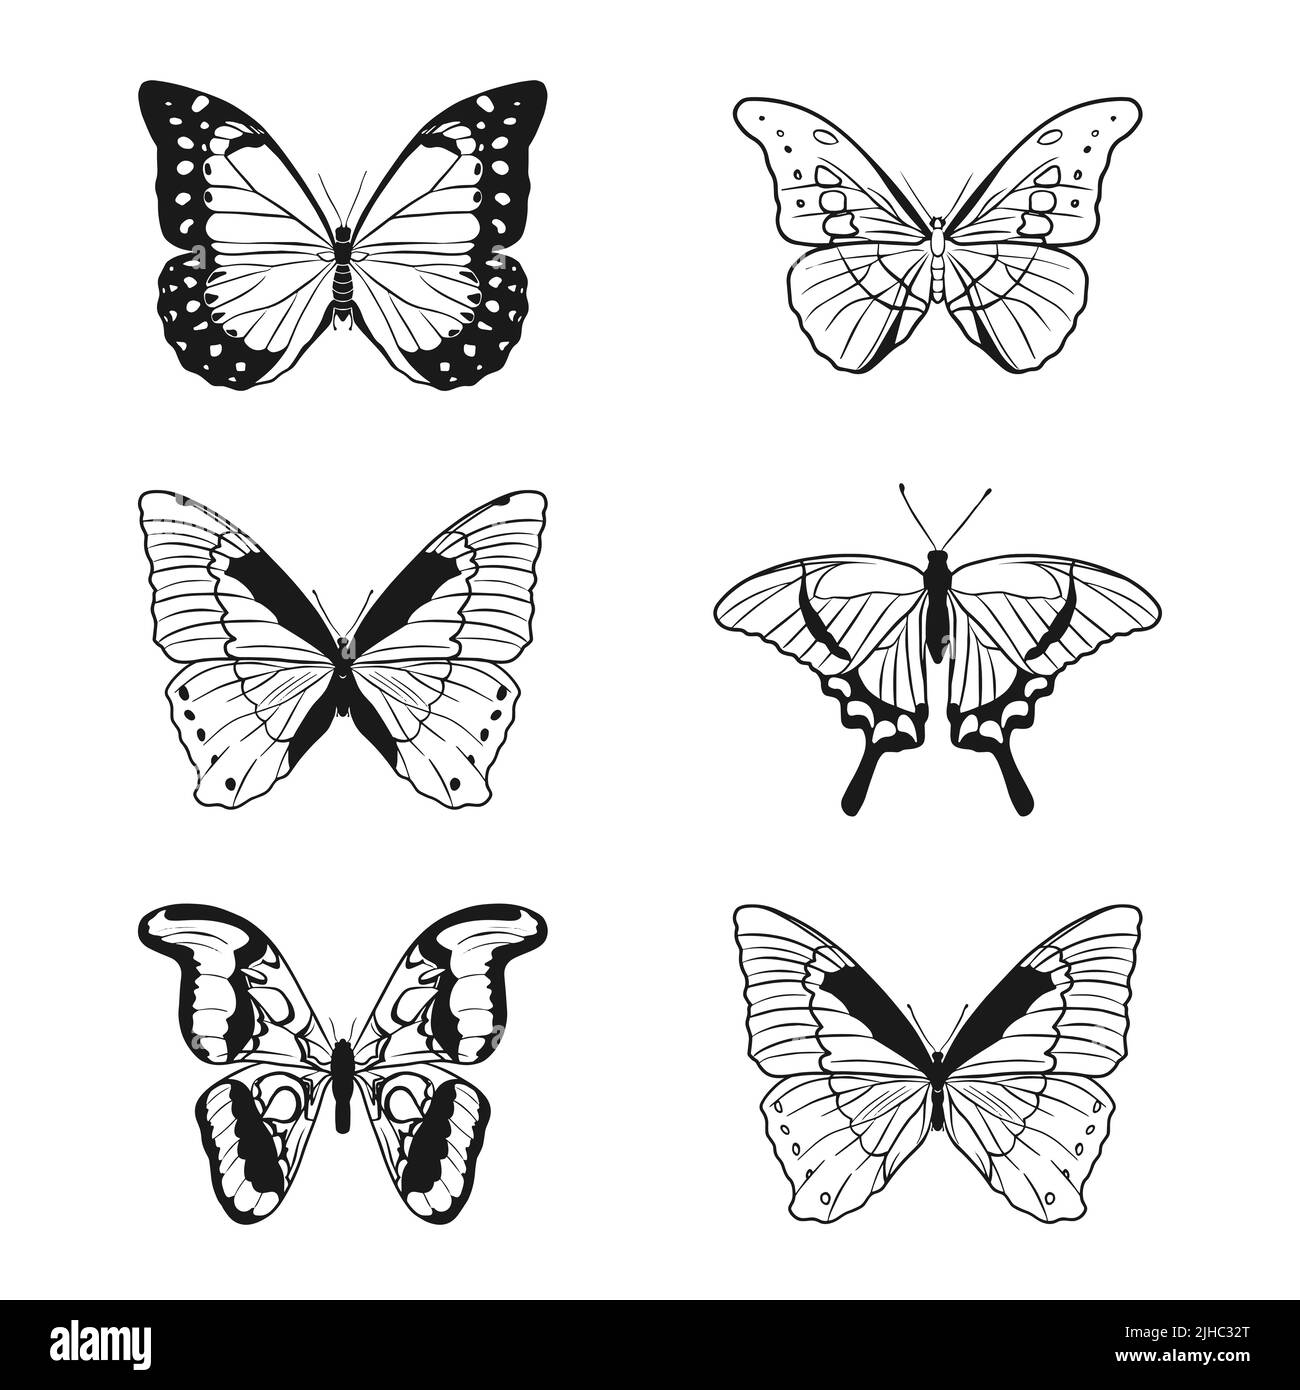 A set of contour drawings of a butterfly on a white background. Doodle style. A design element. Stock Vector